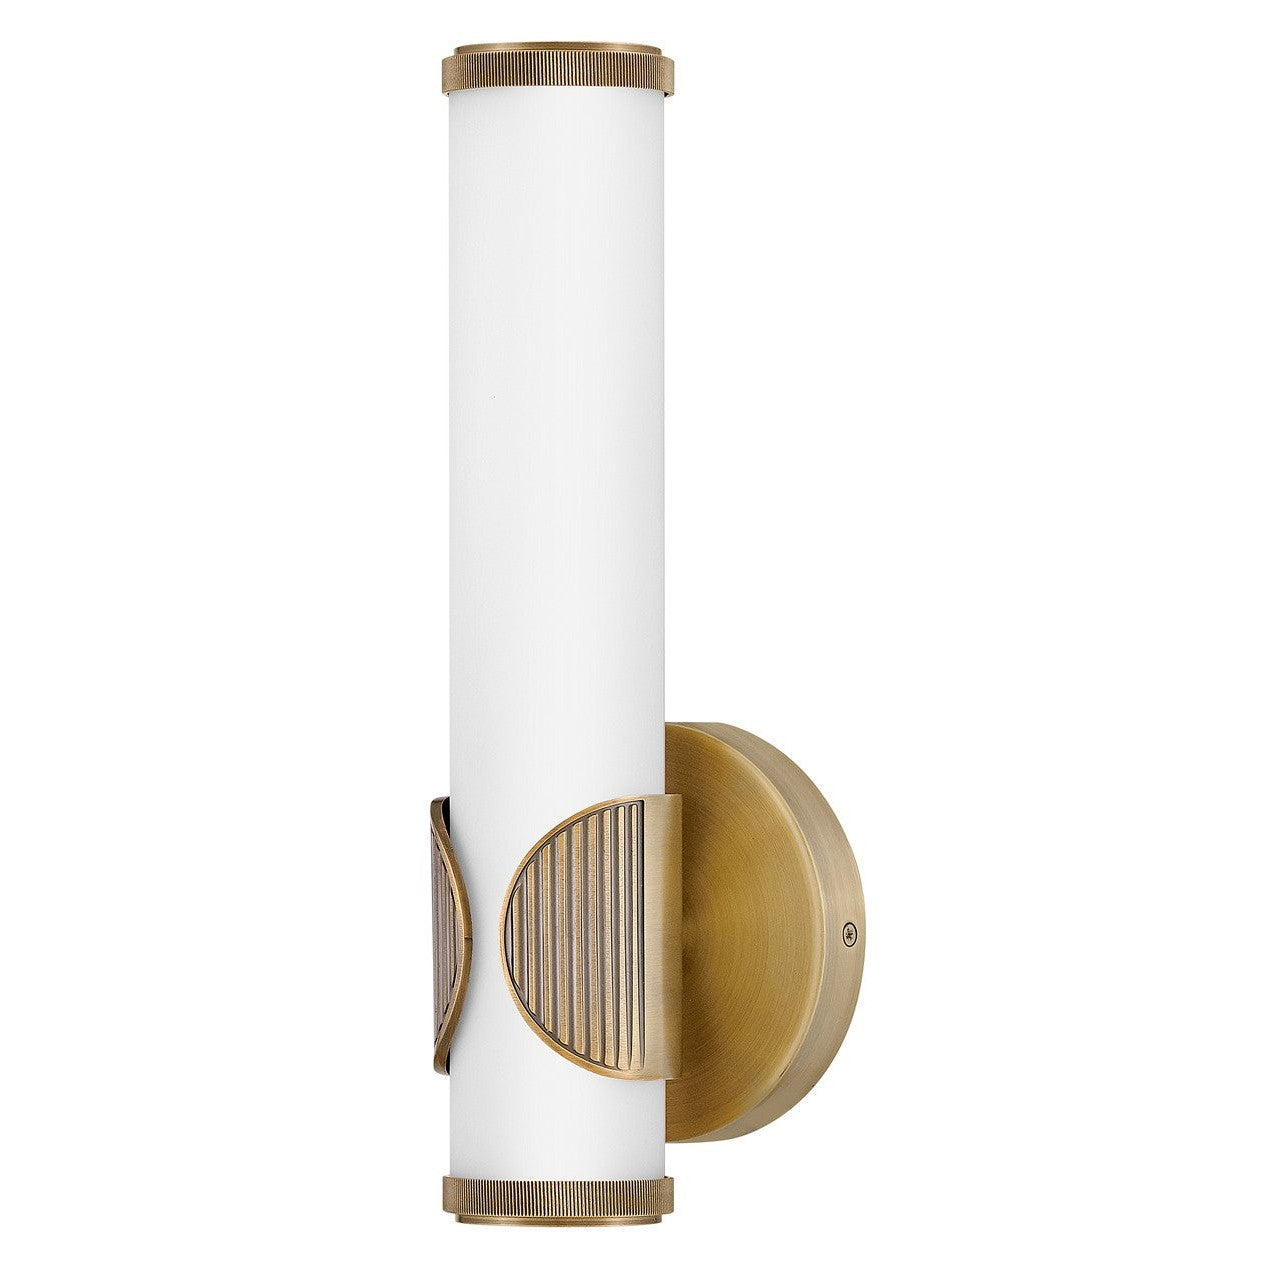 Hinkley Femi 50080LCB Wall Sconce Light - Lacquered Brass